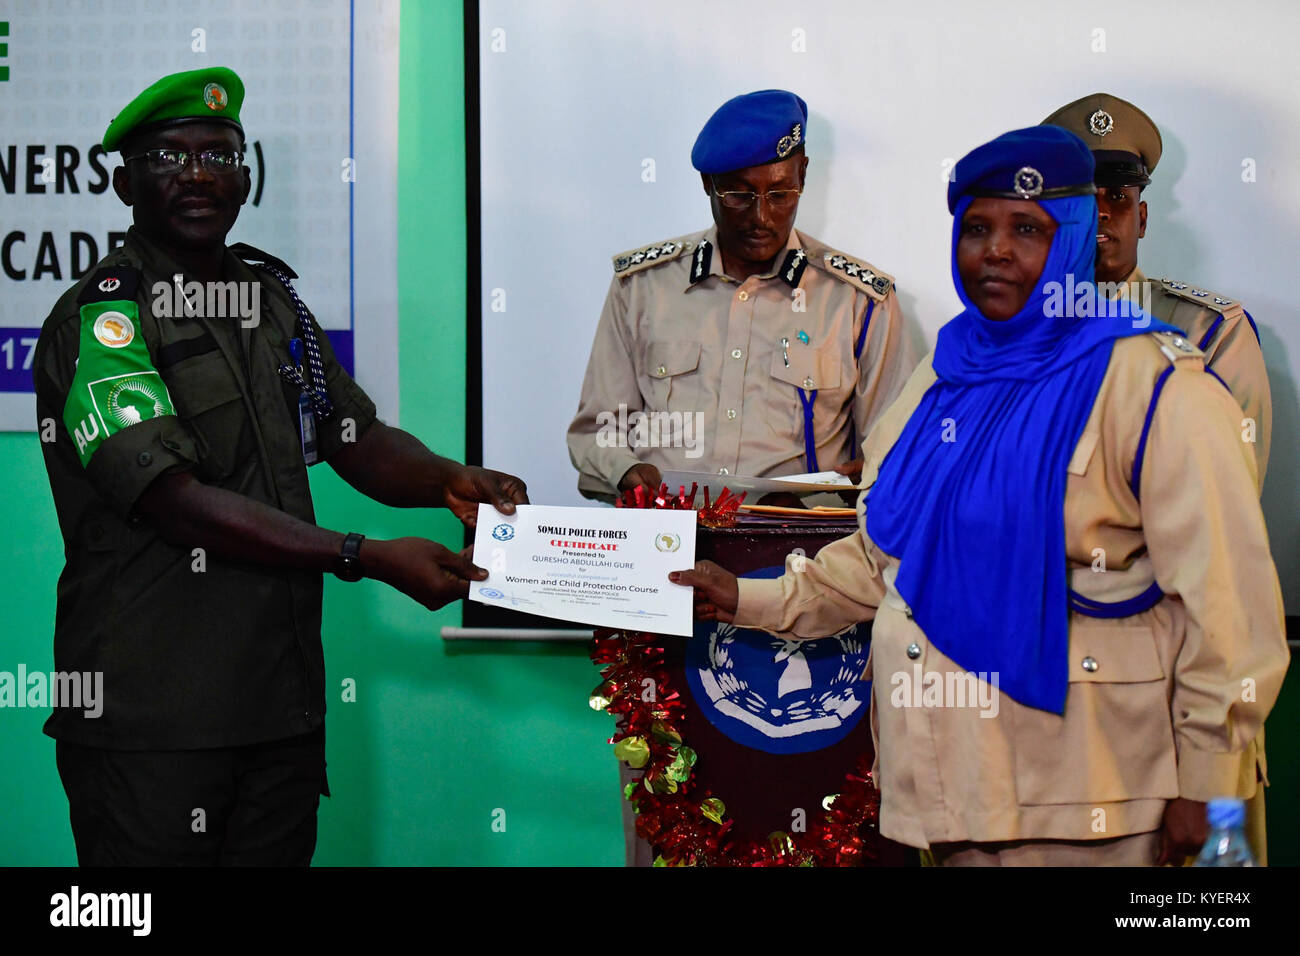 AMISOM Police Operations Co-ordinator, Assistant Commissioner of Police, Daniel Ali Gwambal handing a certificate to a Somali Police officer at the end of the joint Women and Child Protection and Basic Counter Insurgency courses in Mogadishu on Thursday, August 31 2017. AMISOM Photo/ Atulinda Allan Stock Photo